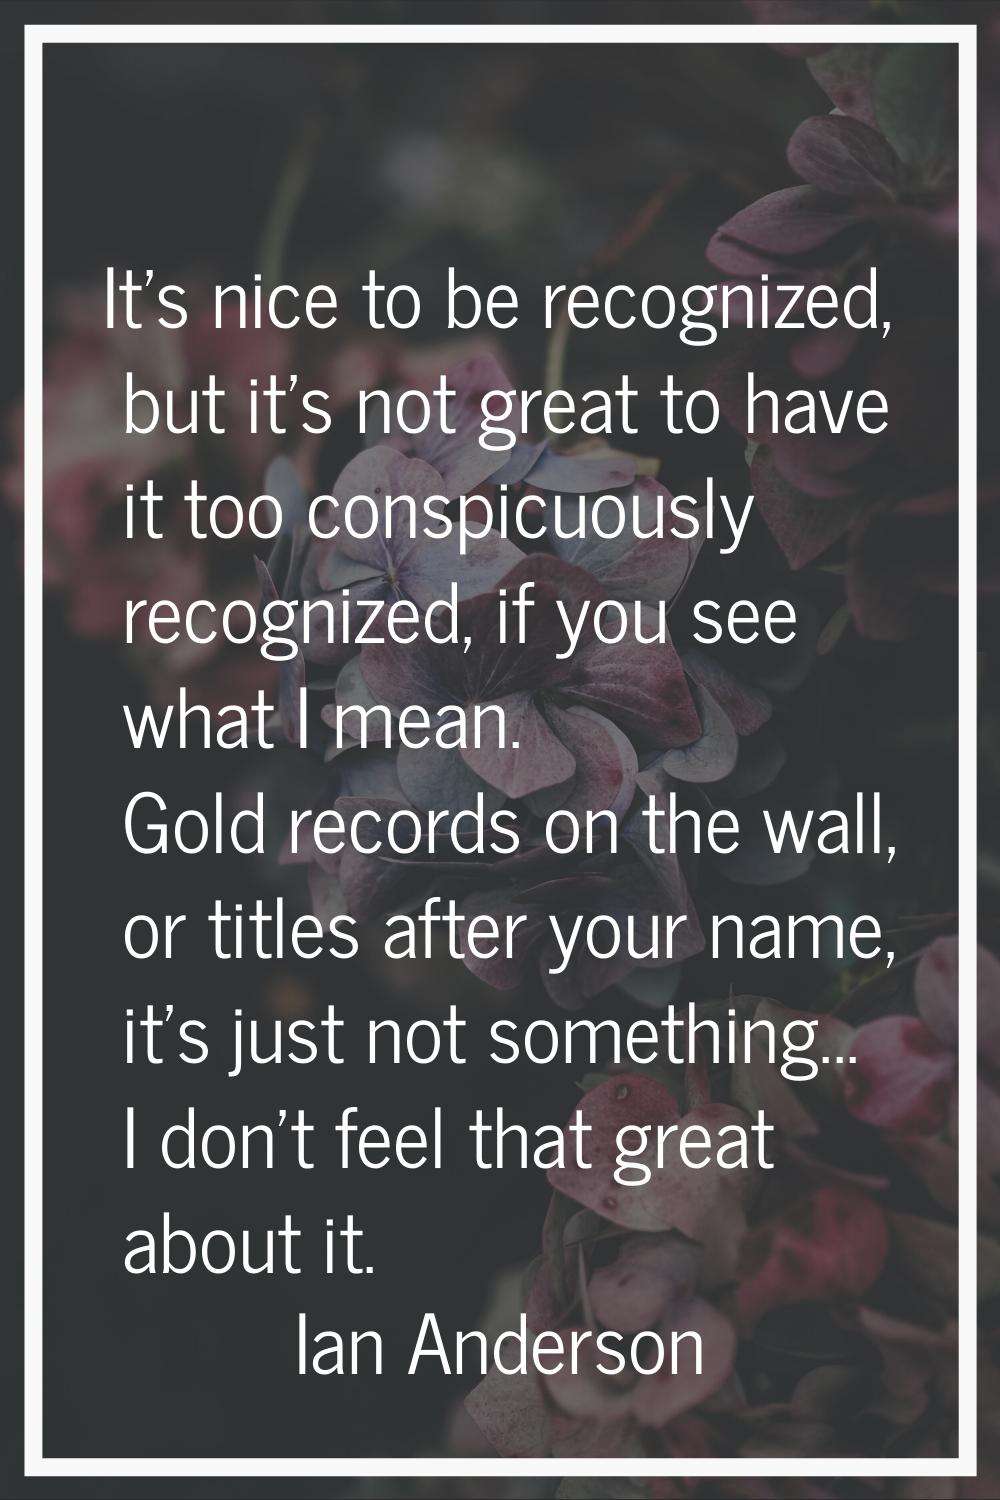 It's nice to be recognized, but it's not great to have it too conspicuously recognized, if you see 